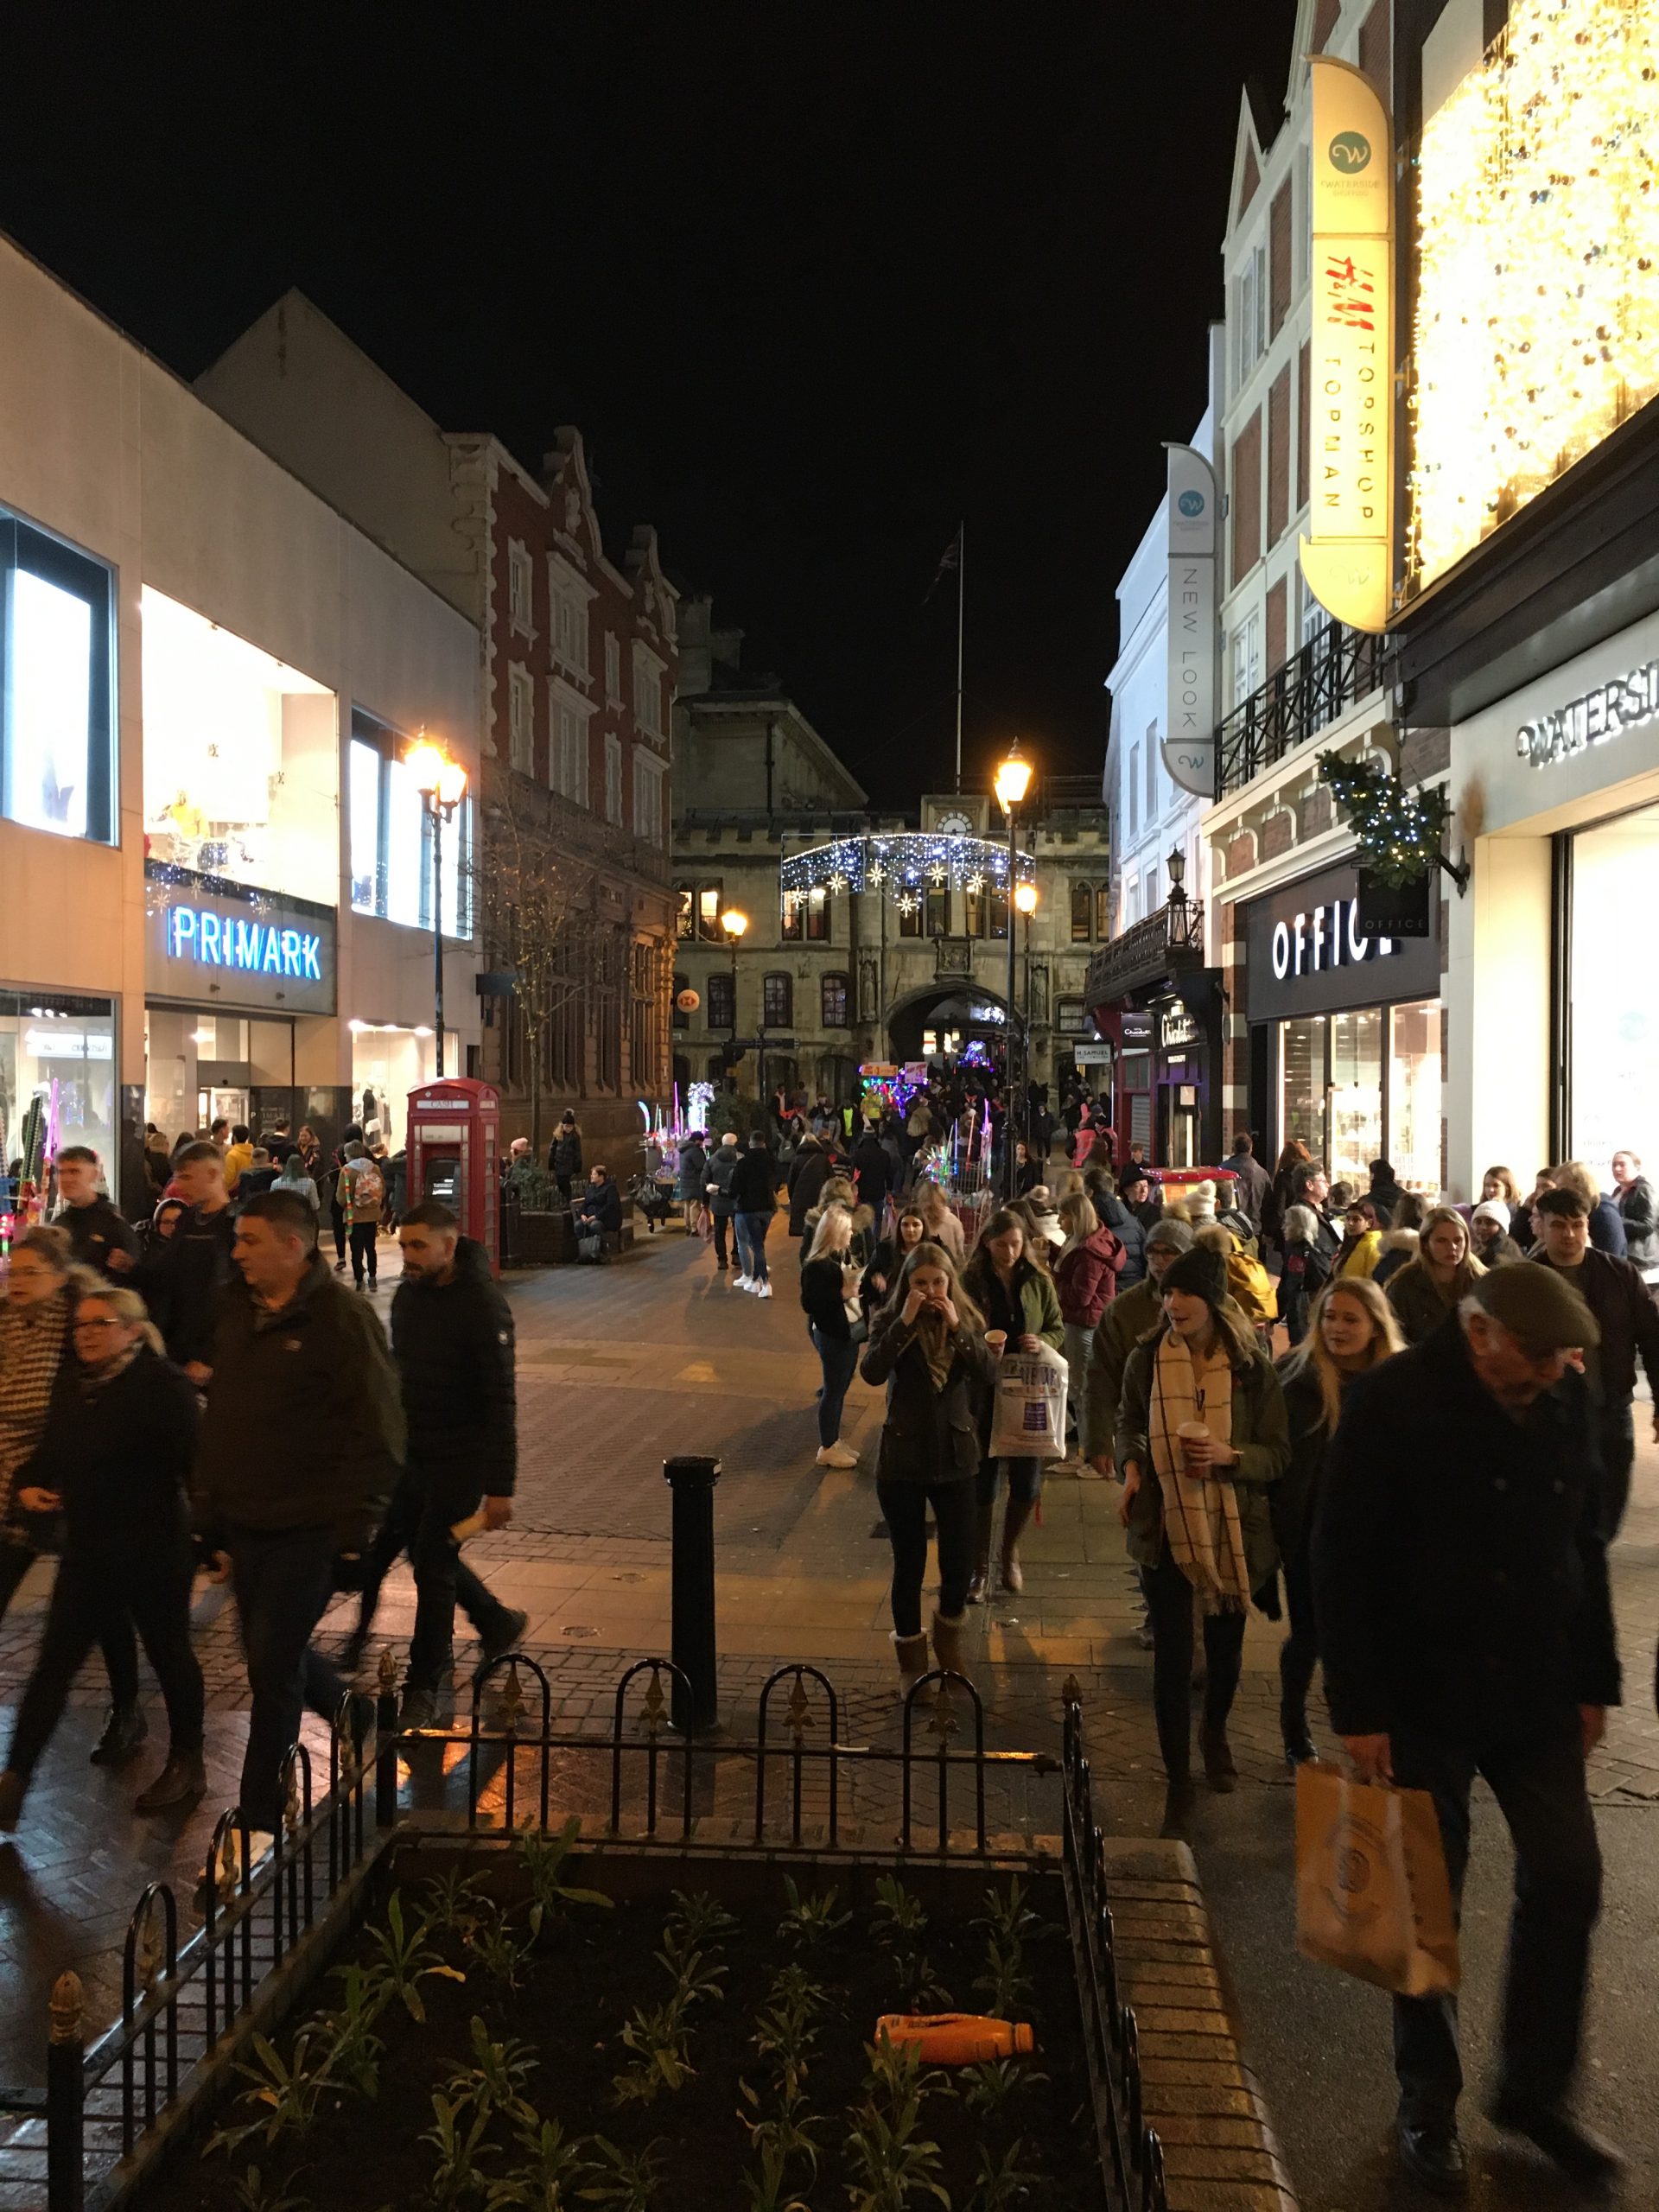 Shoppers can enjoy the festive lights as they do their late night shopping. Photo: Anna Parkinson